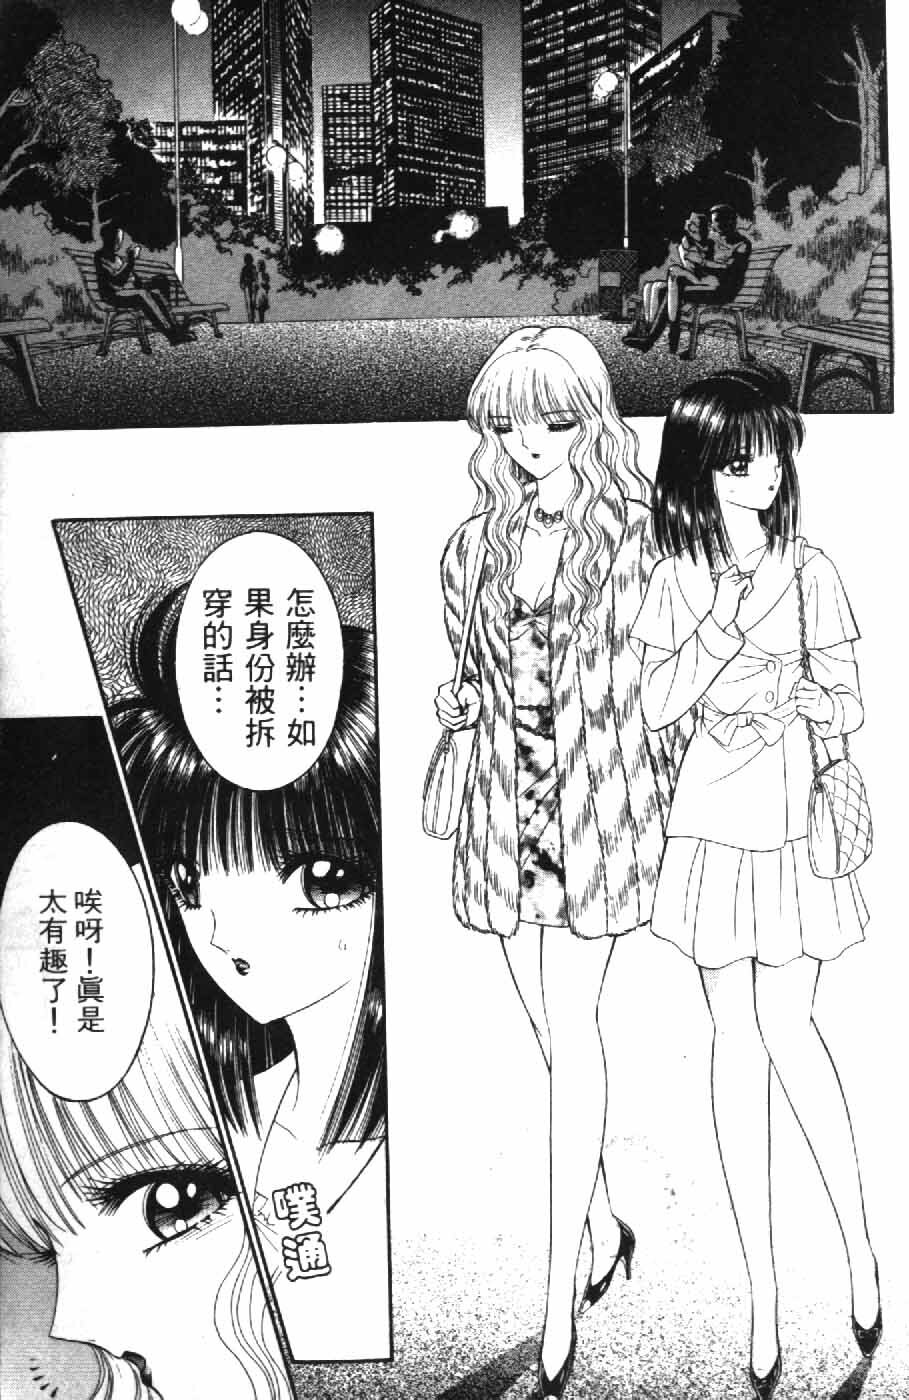 [Senno Knife] Ouma ga Horror Show 2 - Trans Sexual Special Show 2 | 顫慄博覽會 2 [Chinese] page 13 full